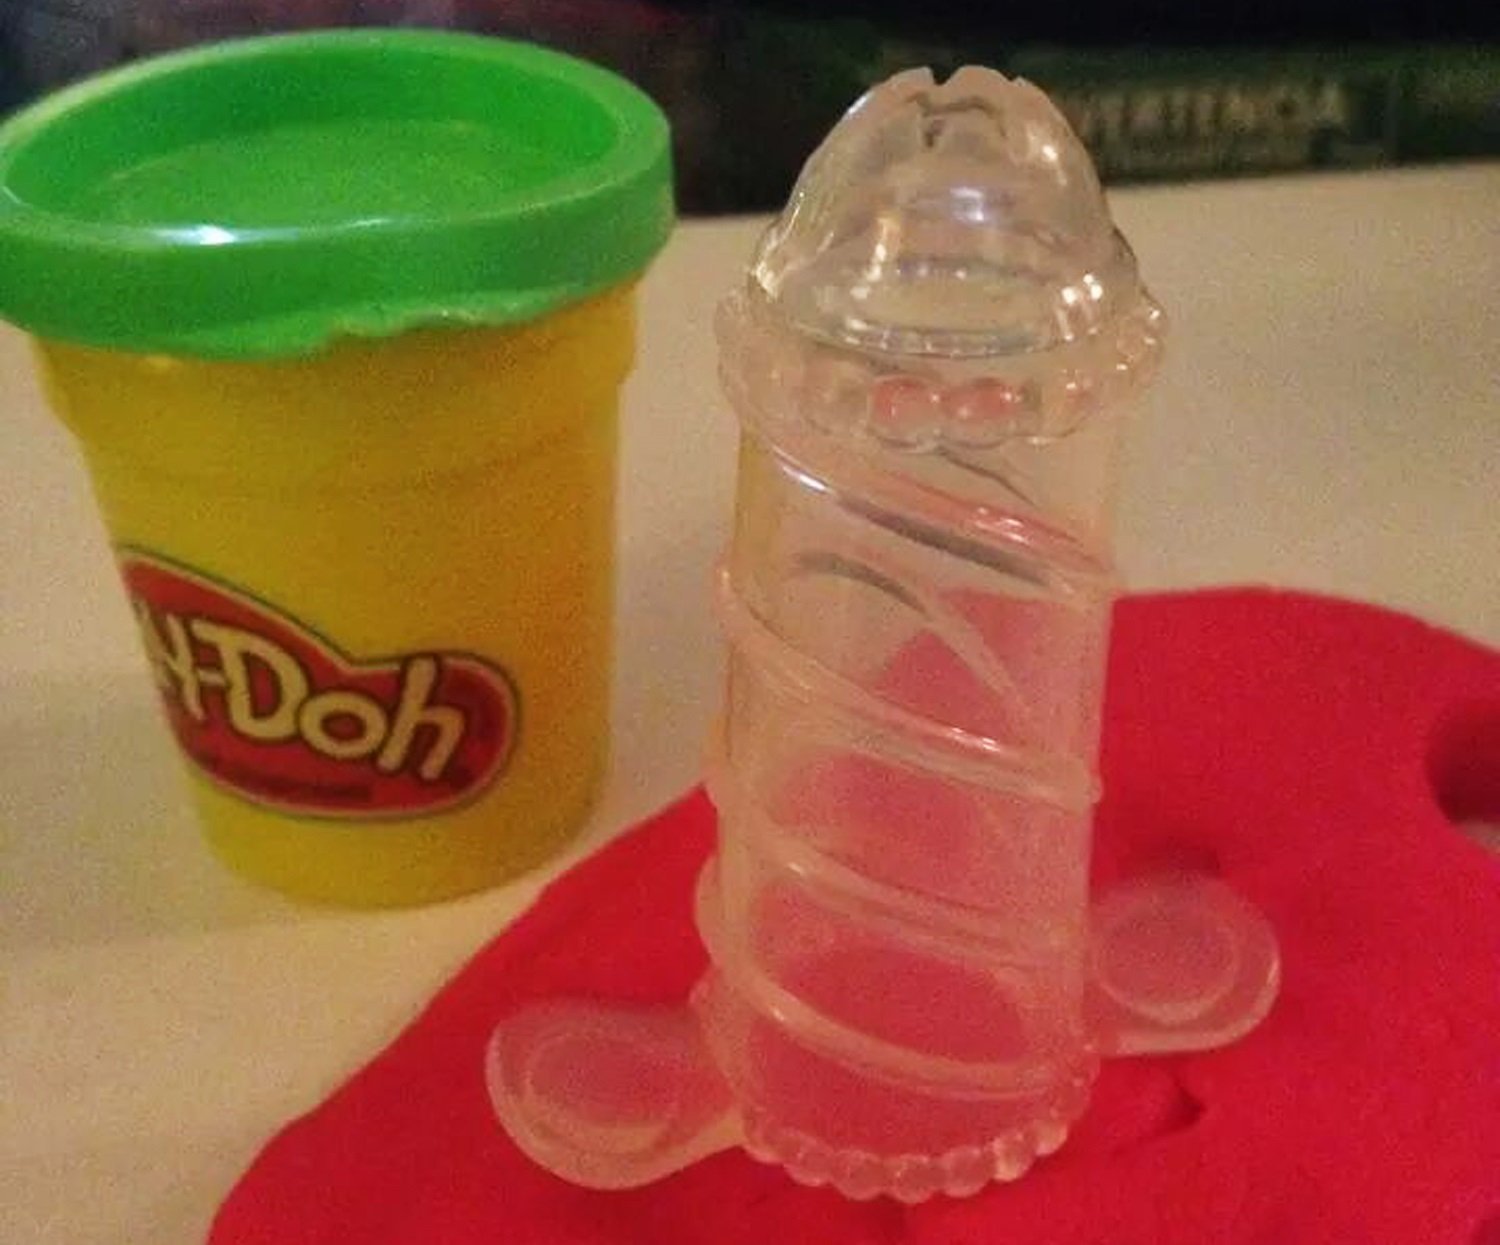 Play Doh Maker Offers To Replace Plastic Tool That Looks Like Sex Toy